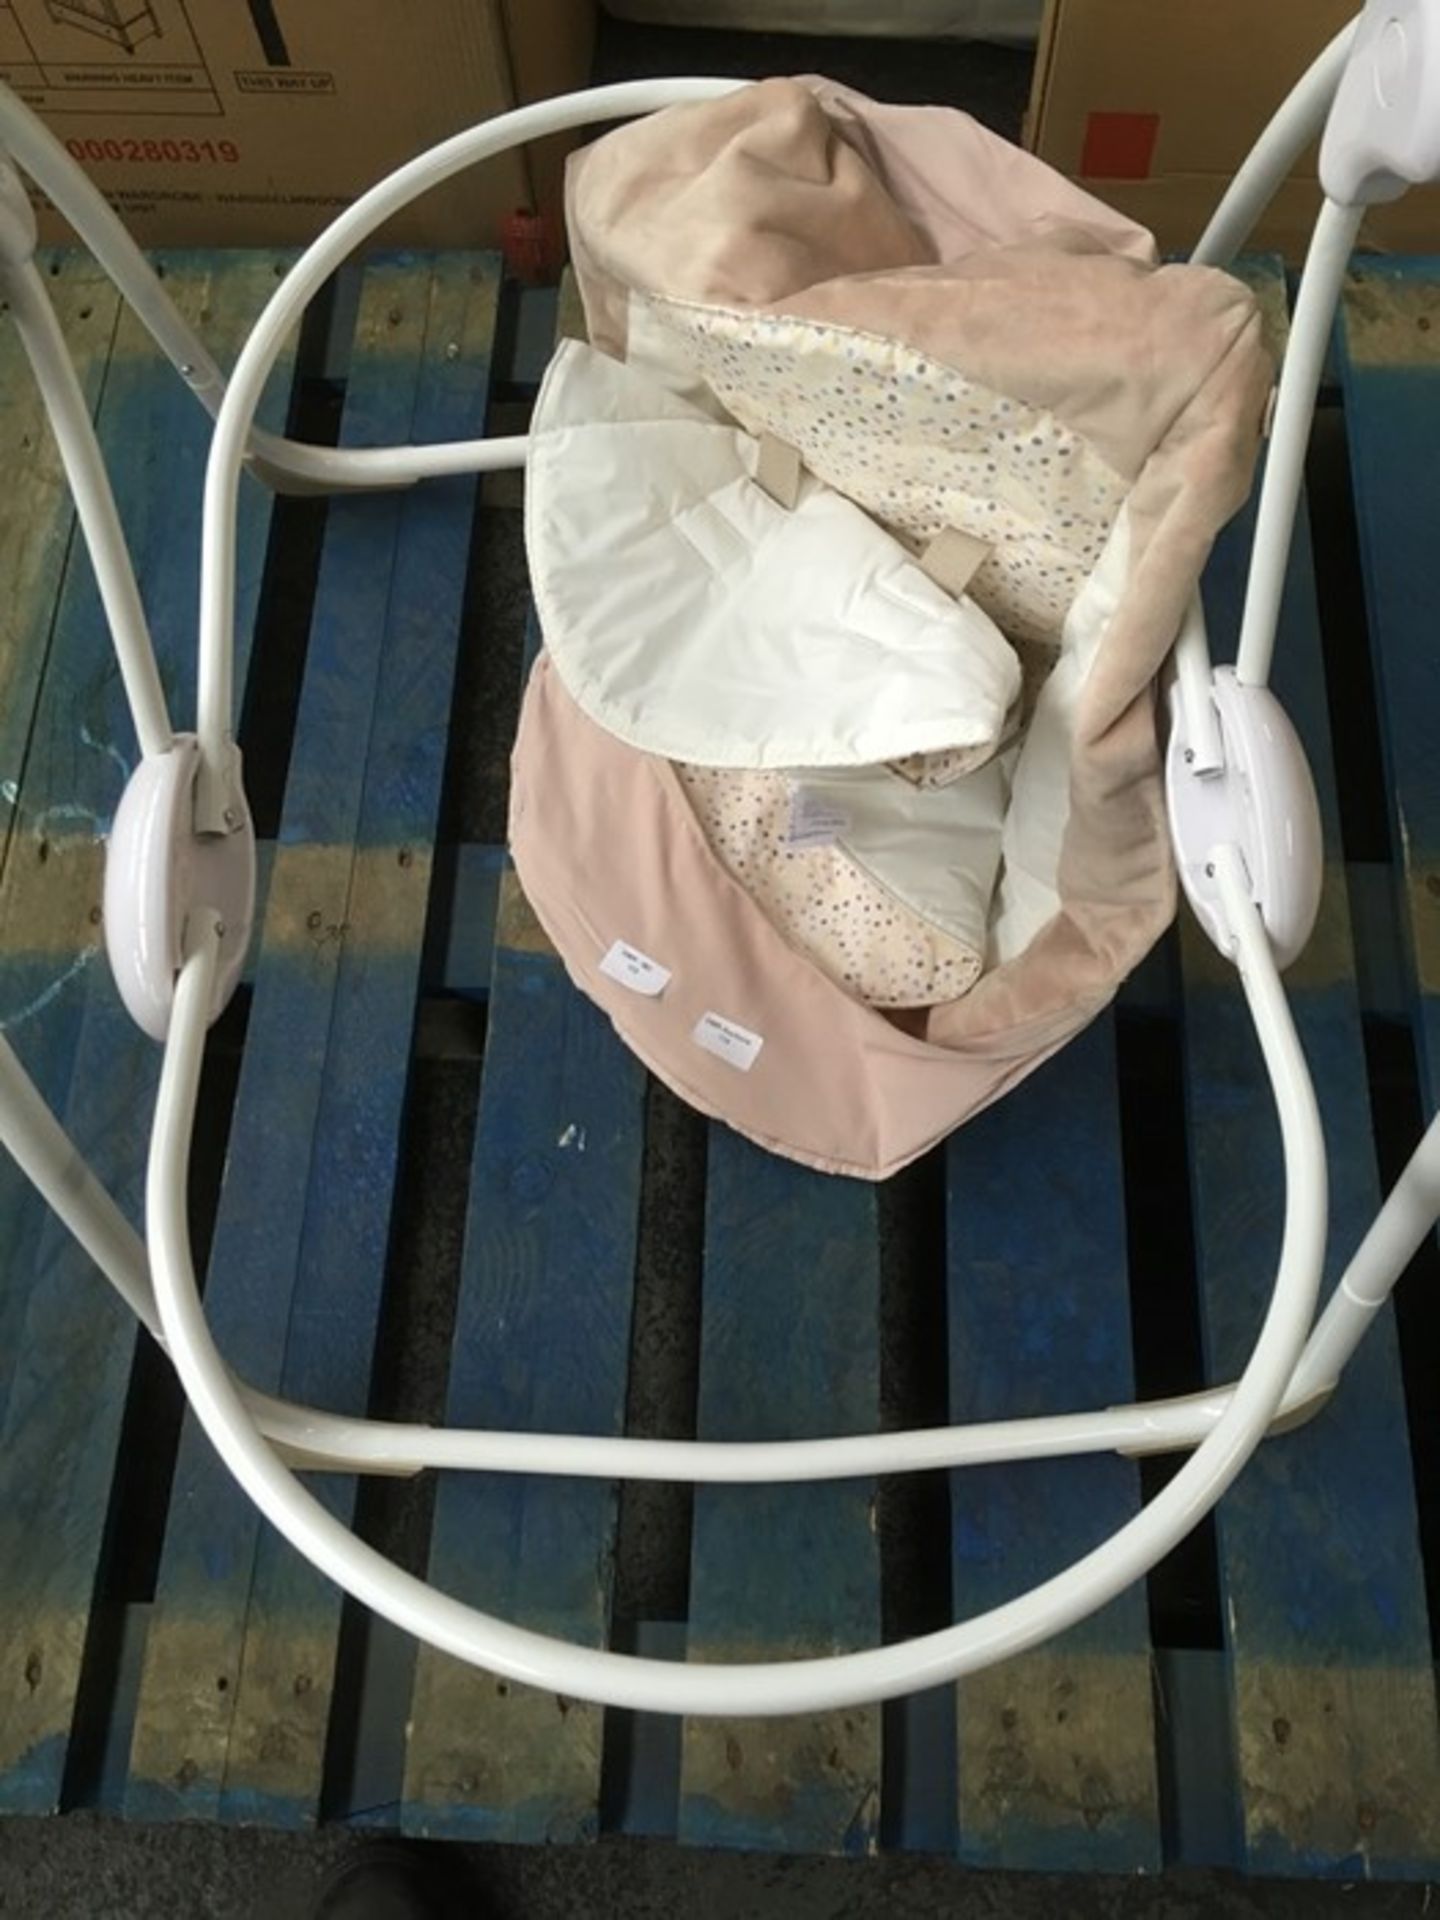 1 MOTHERCARE BABY SWING WITH TEDDYBEAR DESIGN / RRP £40.00 (PUBLIC VIEWING AVAILABLE)